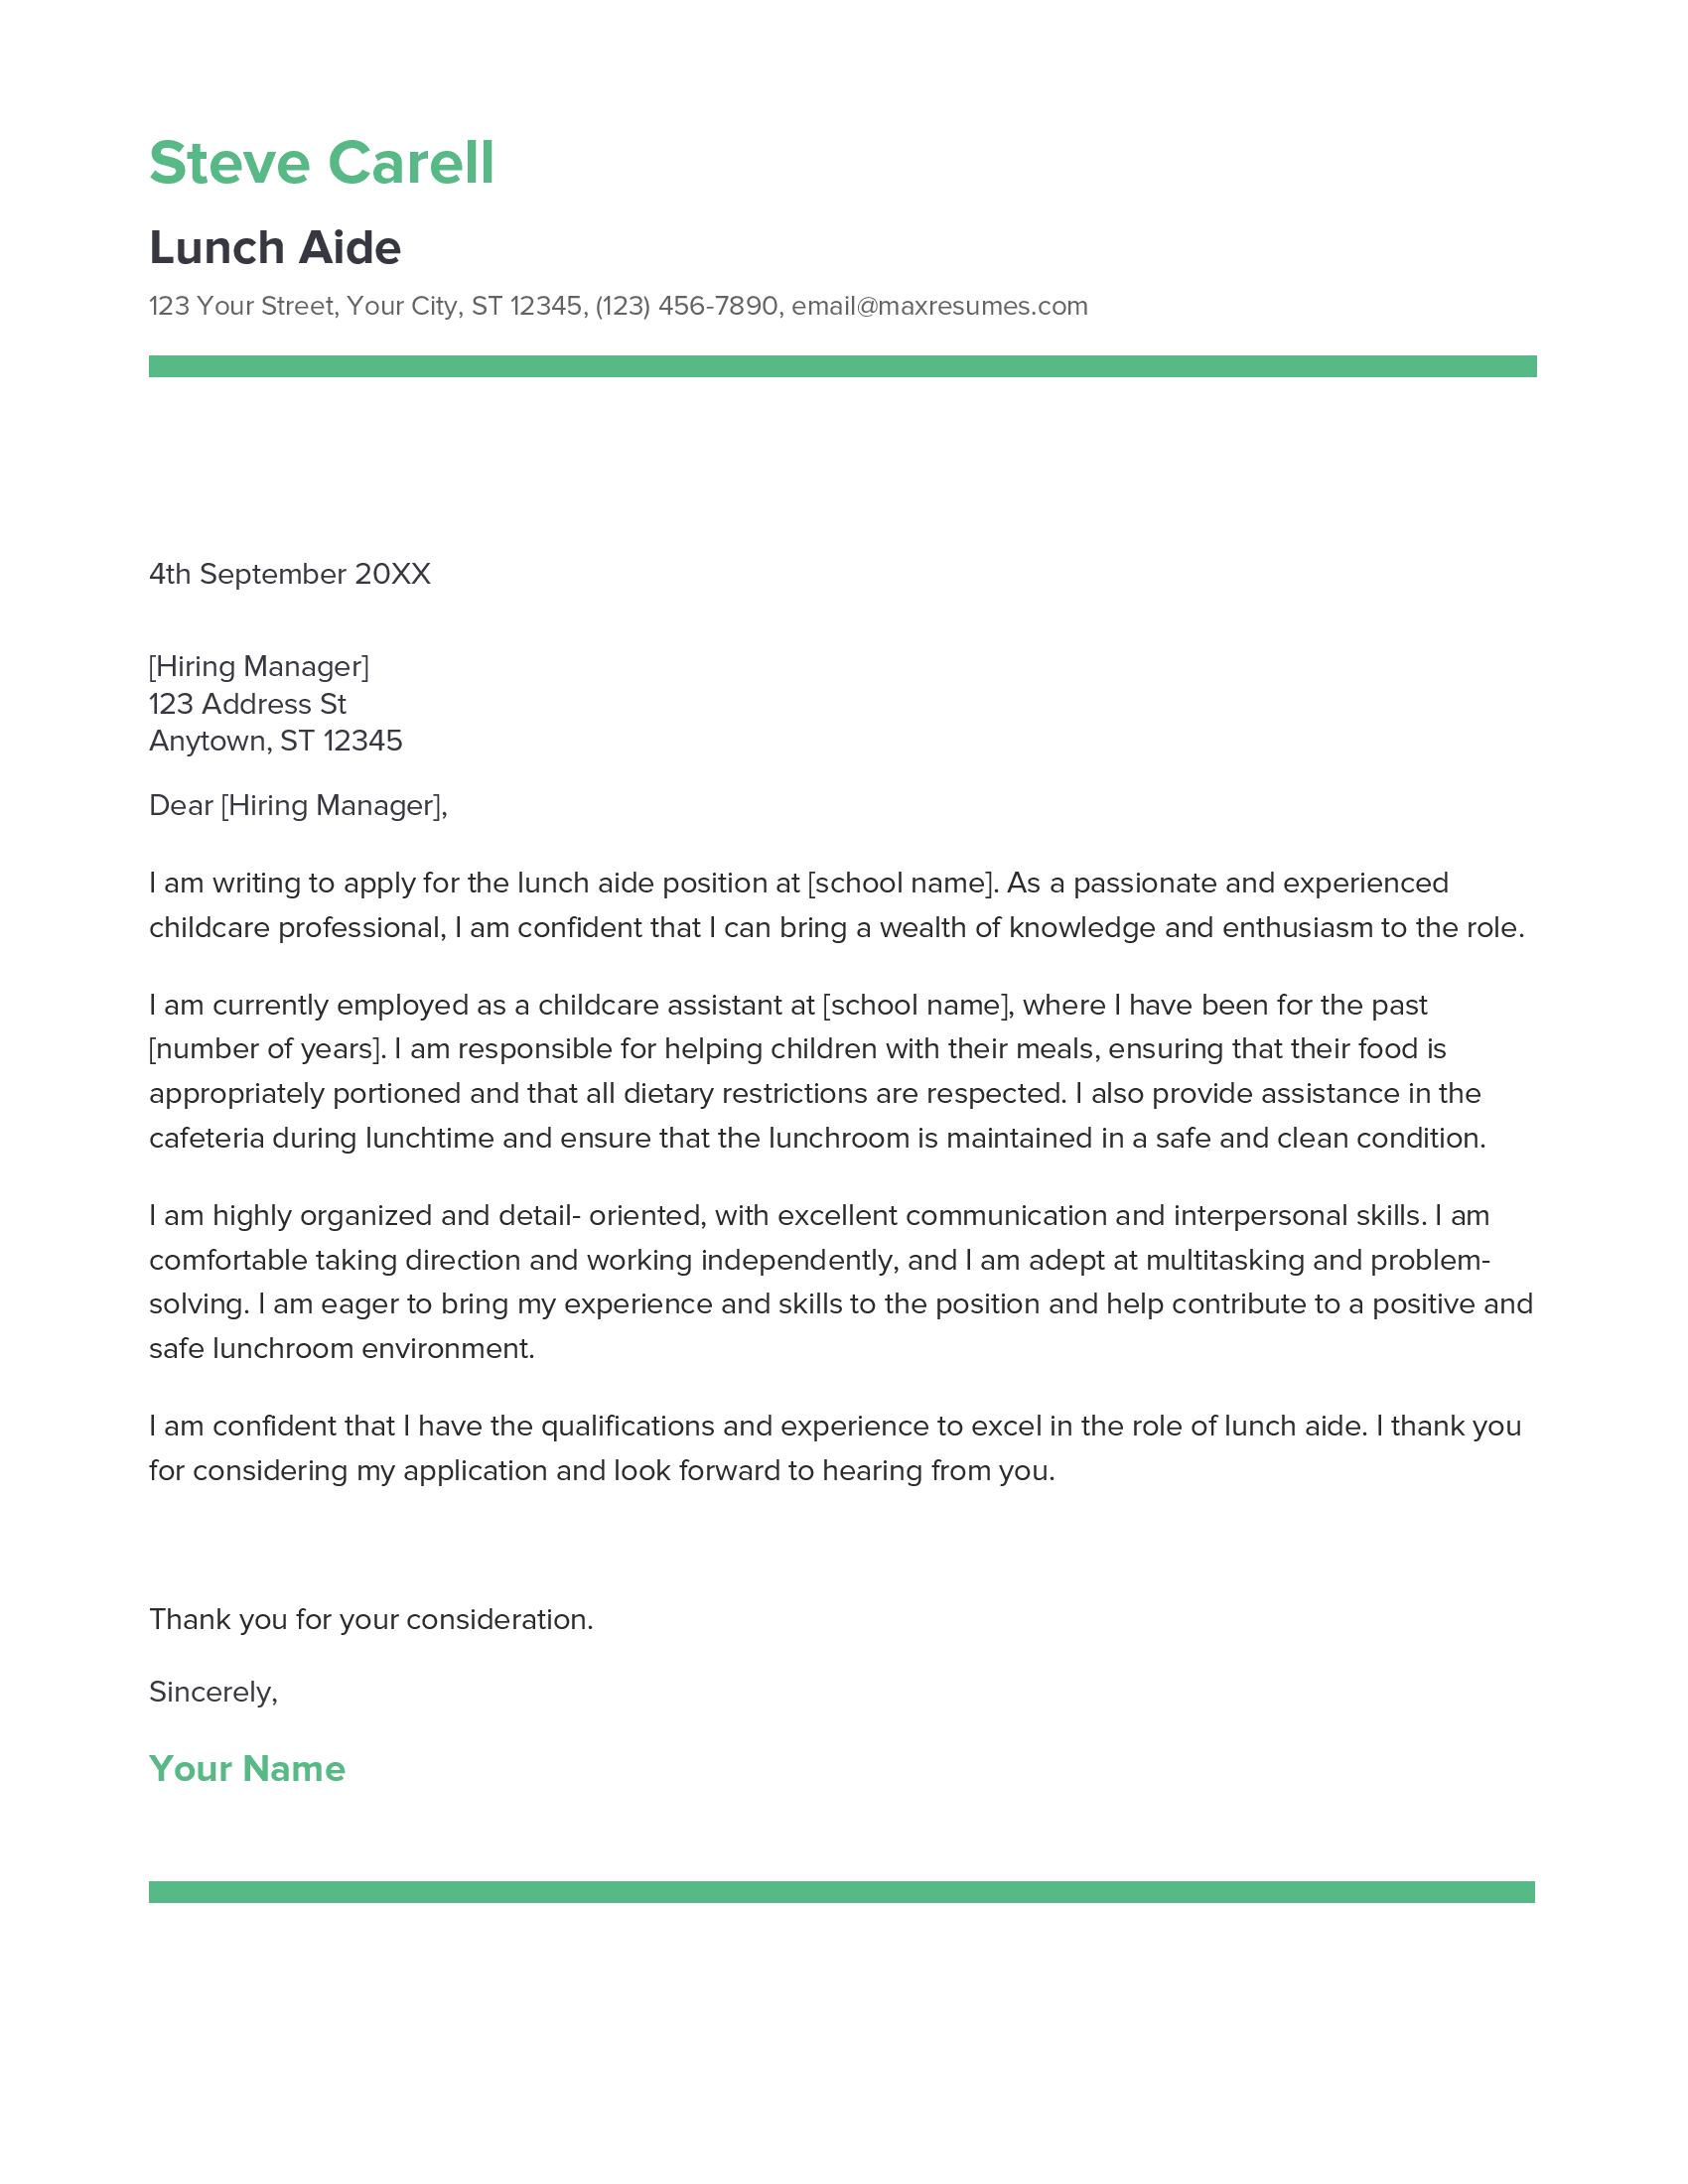 Lunch Aide Cover Letter Example